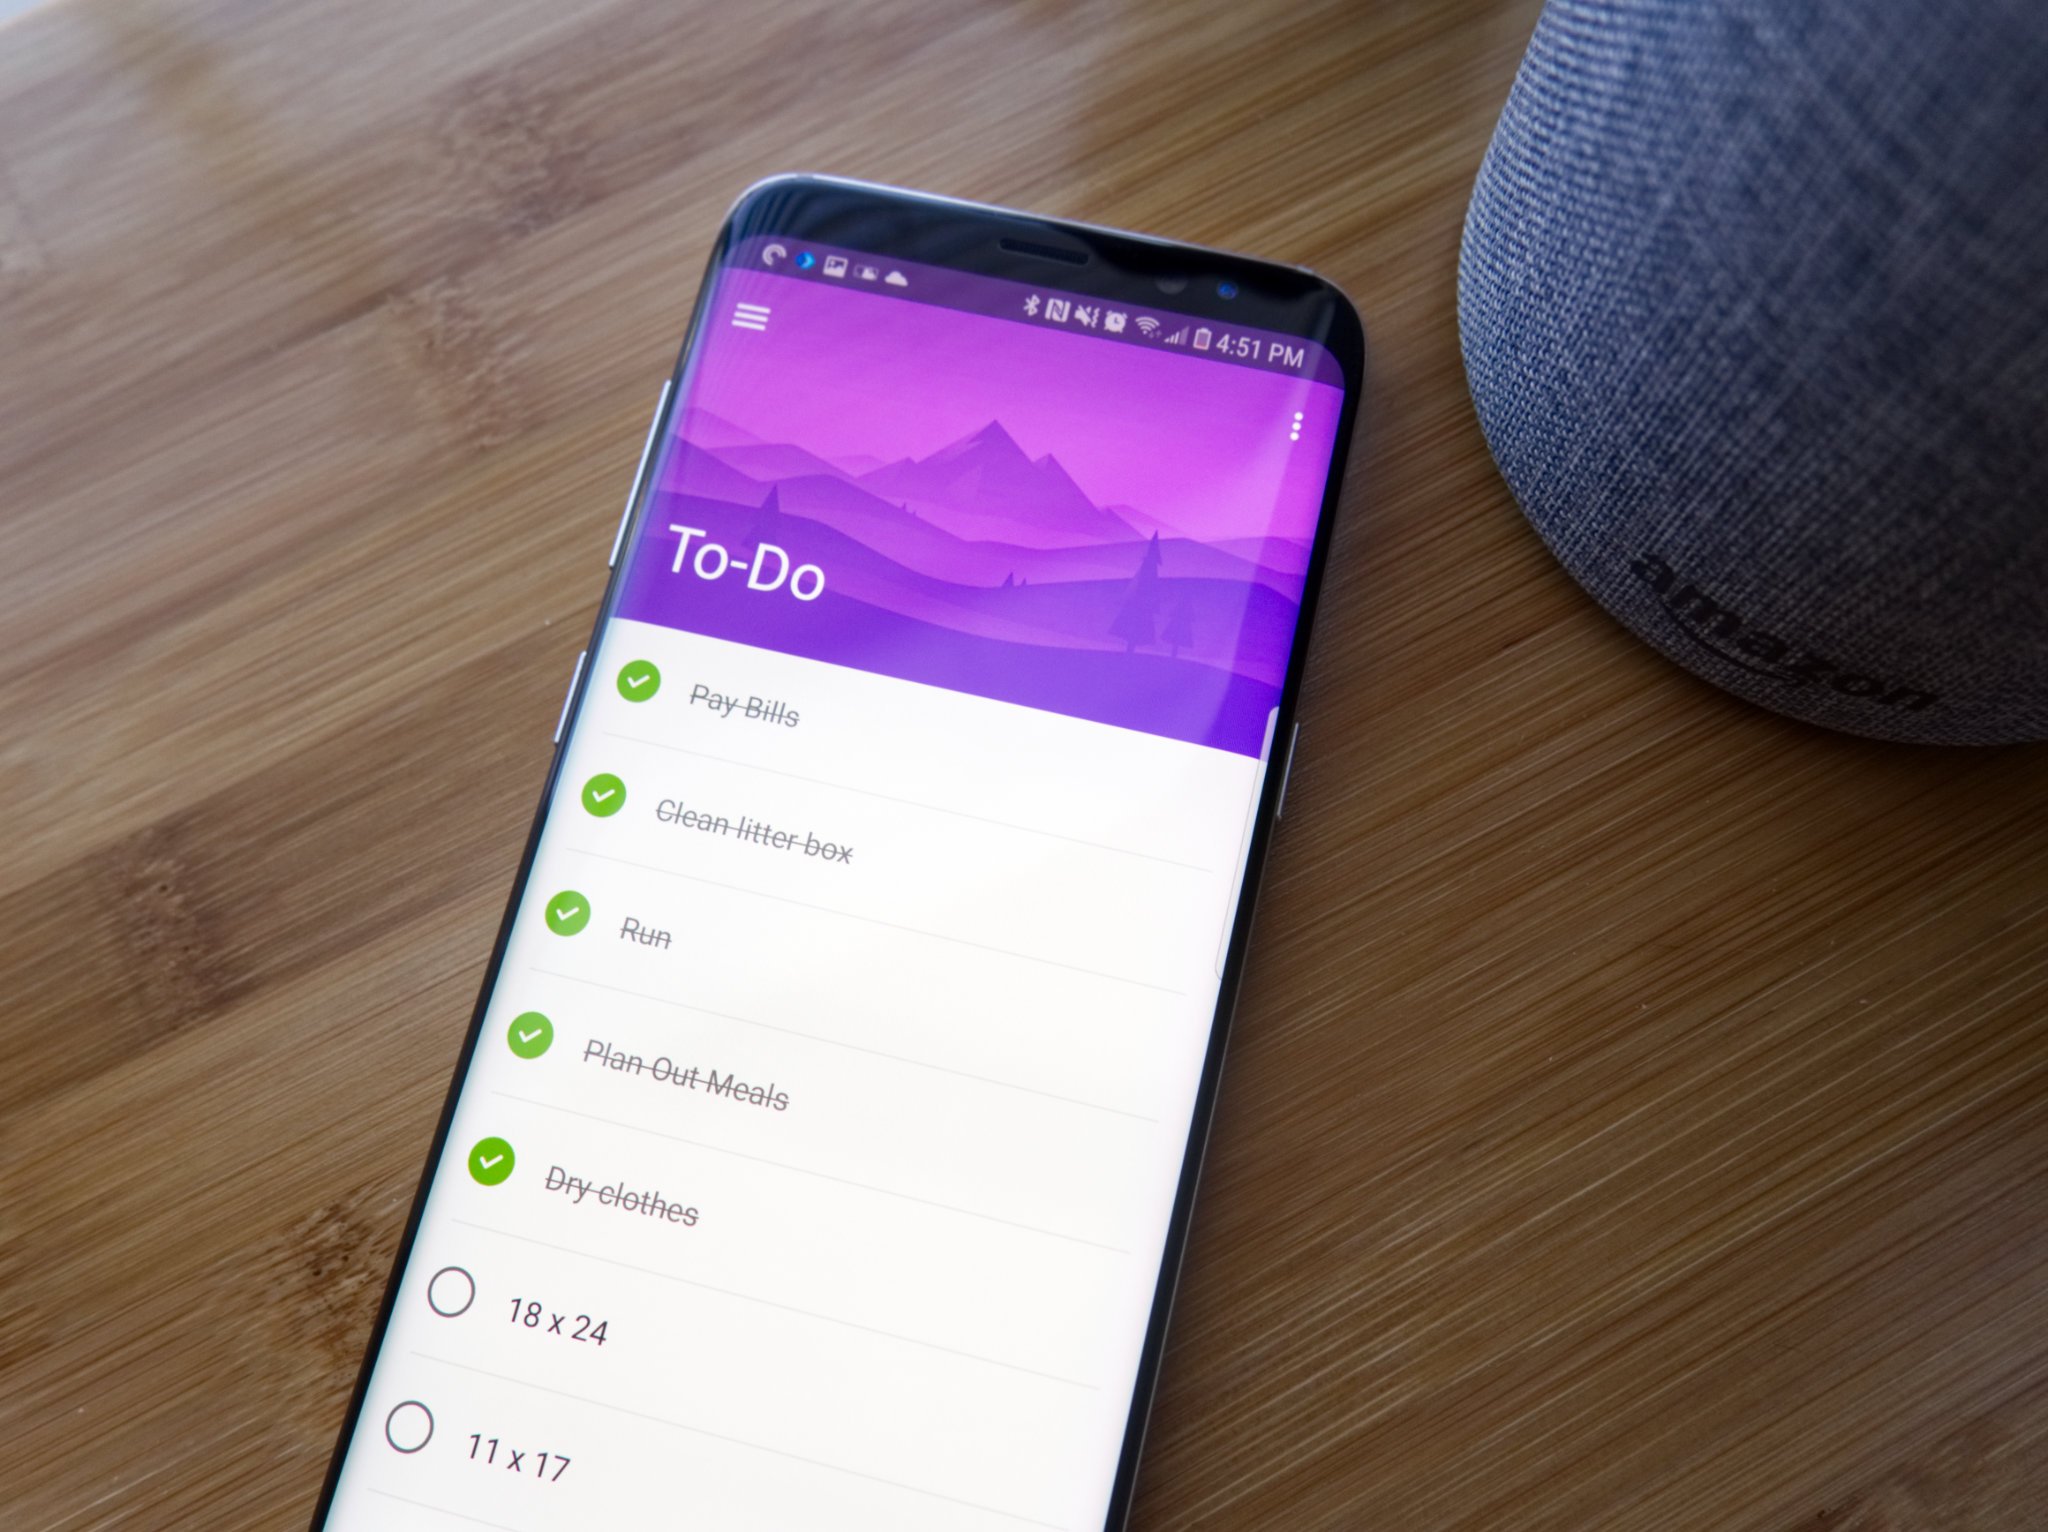 Microsoft To-Do updated on mobile with faster sync, handful of UI tweaks